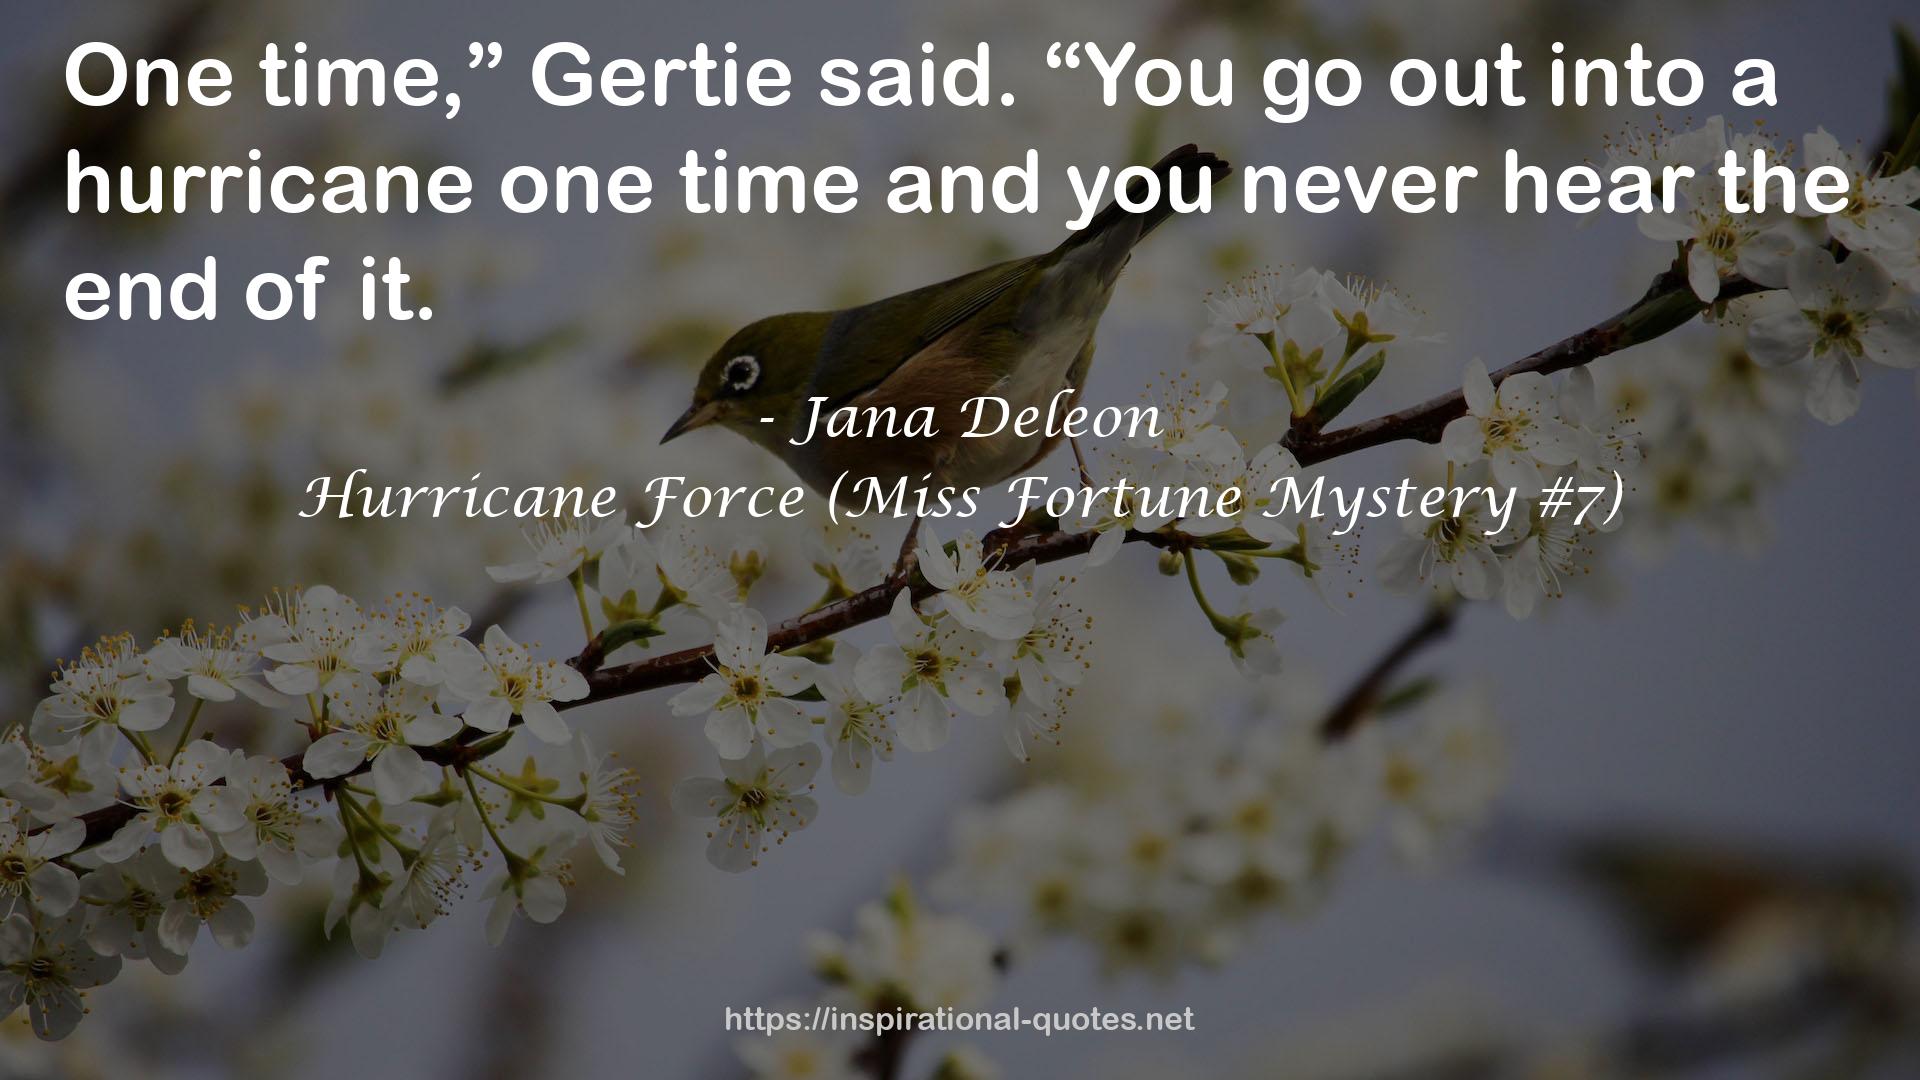 Hurricane Force (Miss Fortune Mystery #7) QUOTES